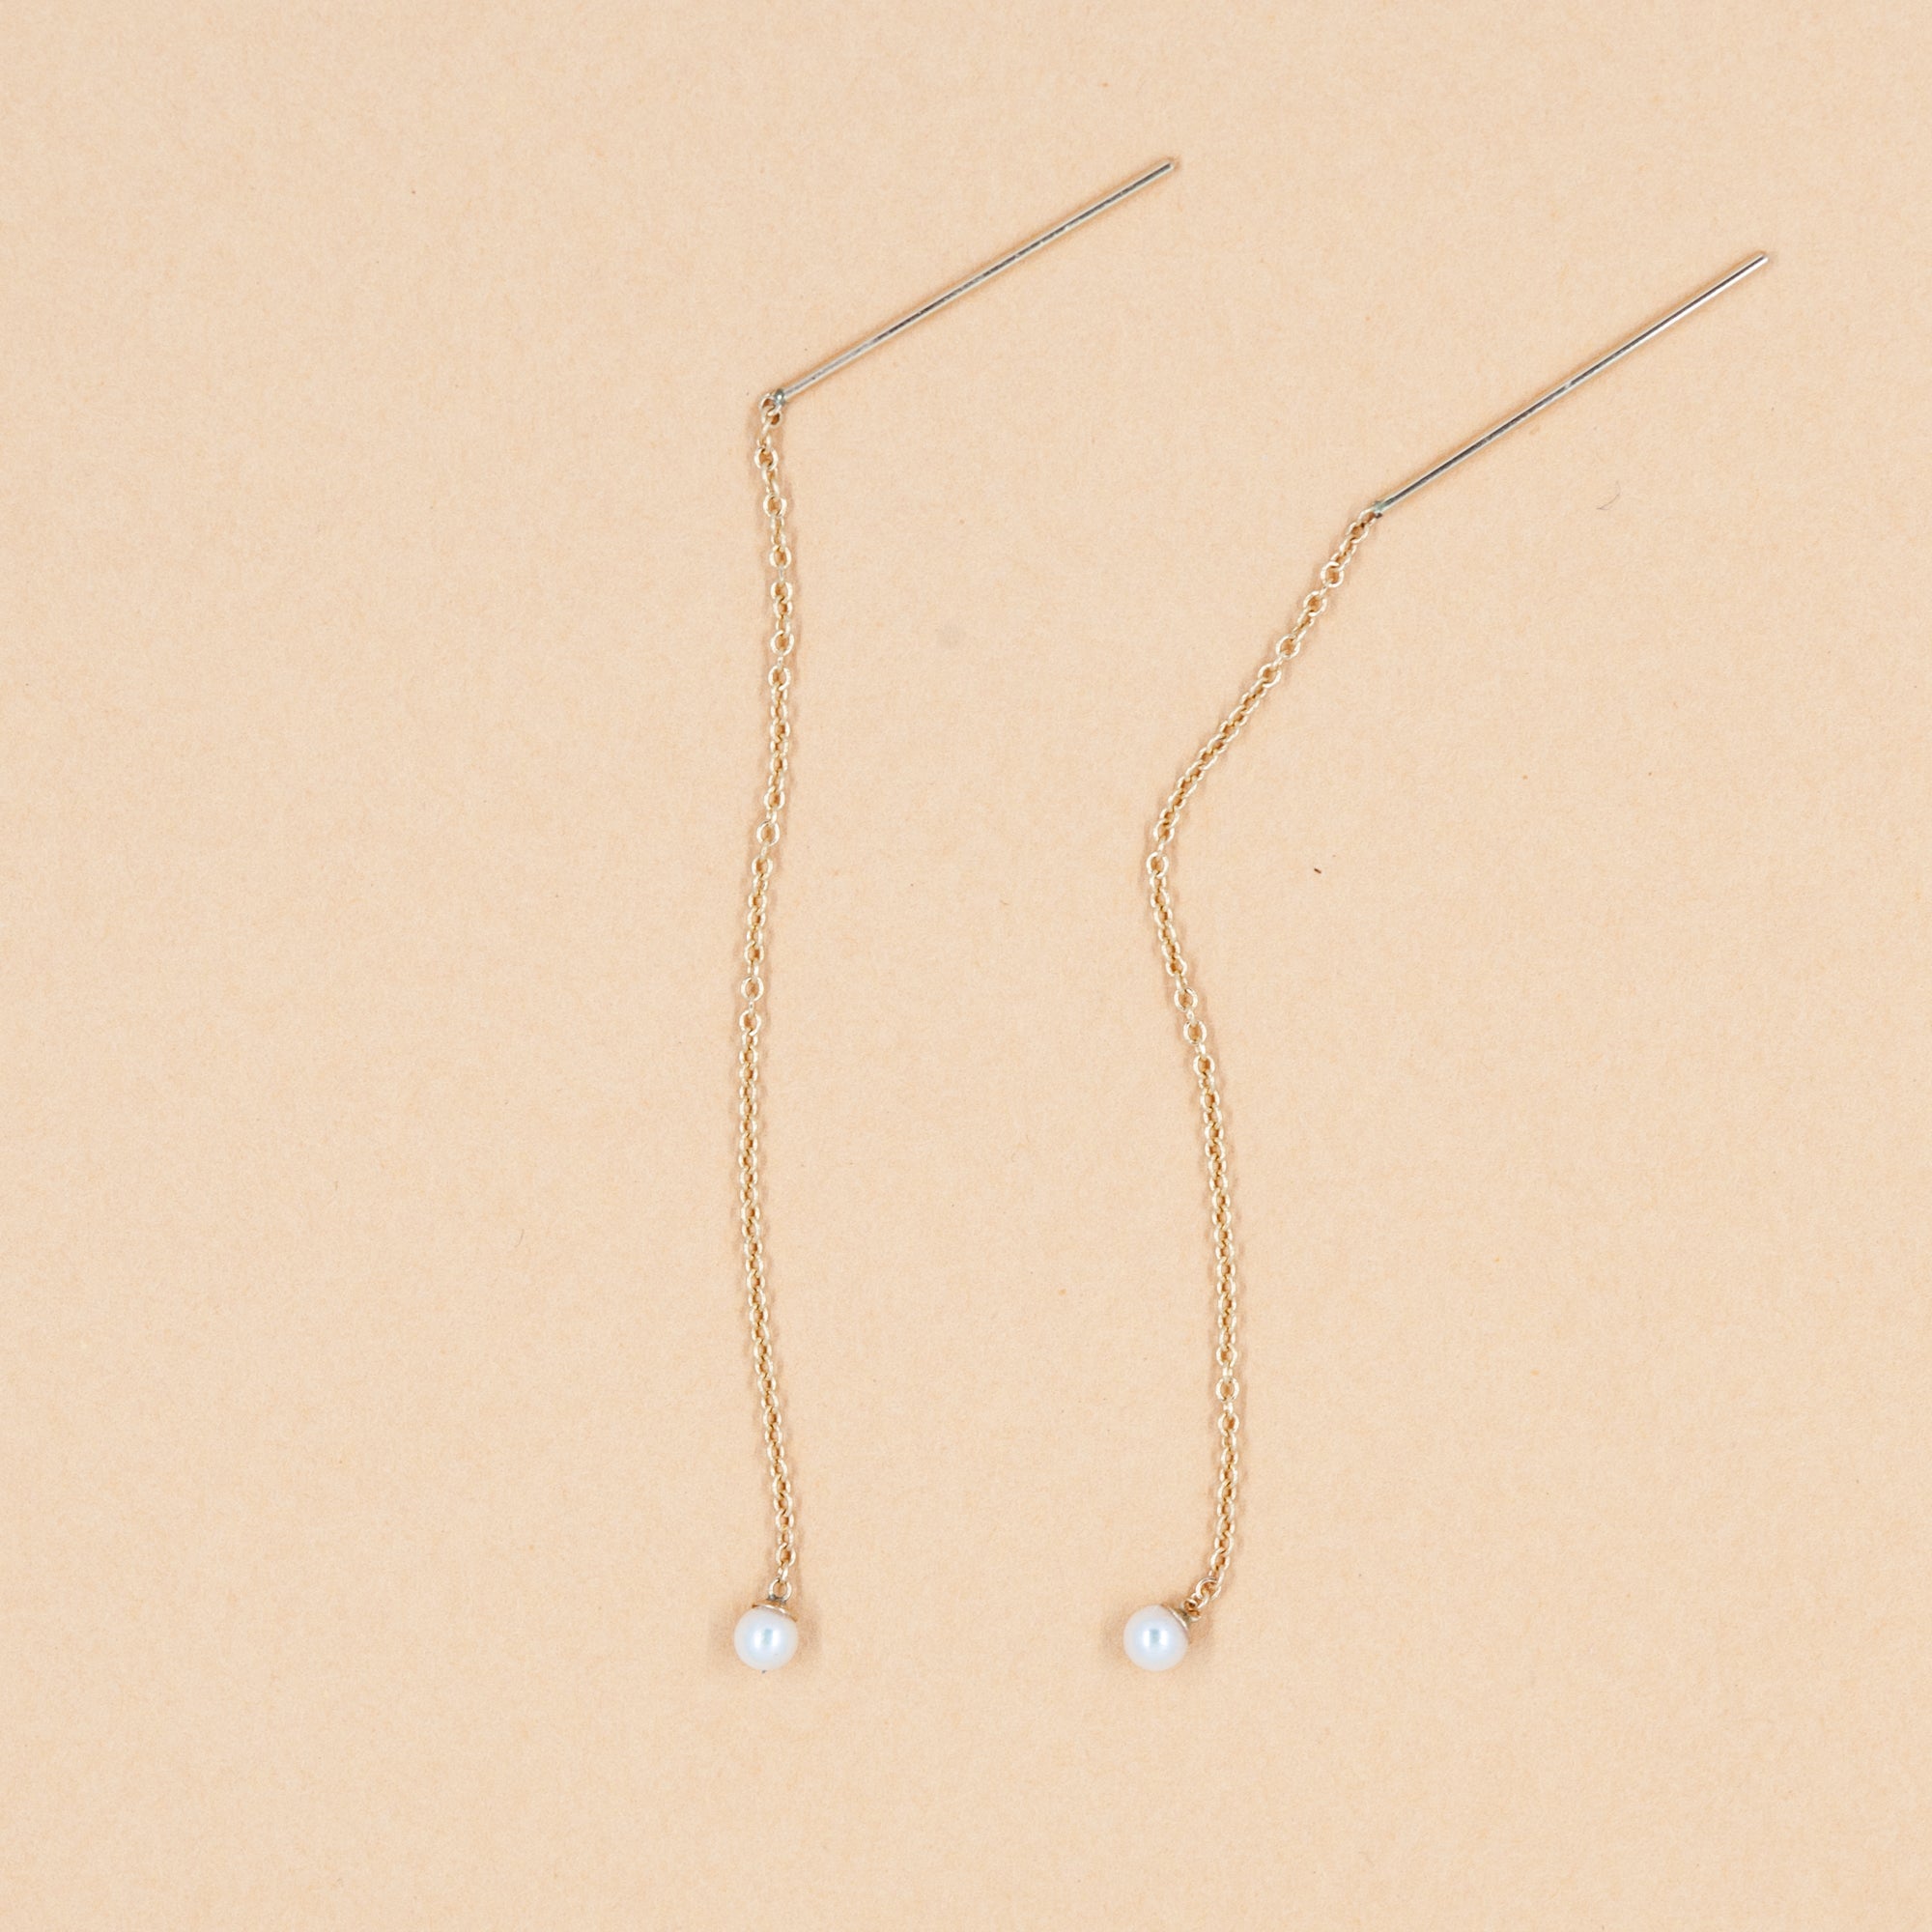 Delicate pearl pull-throughs from our collection.